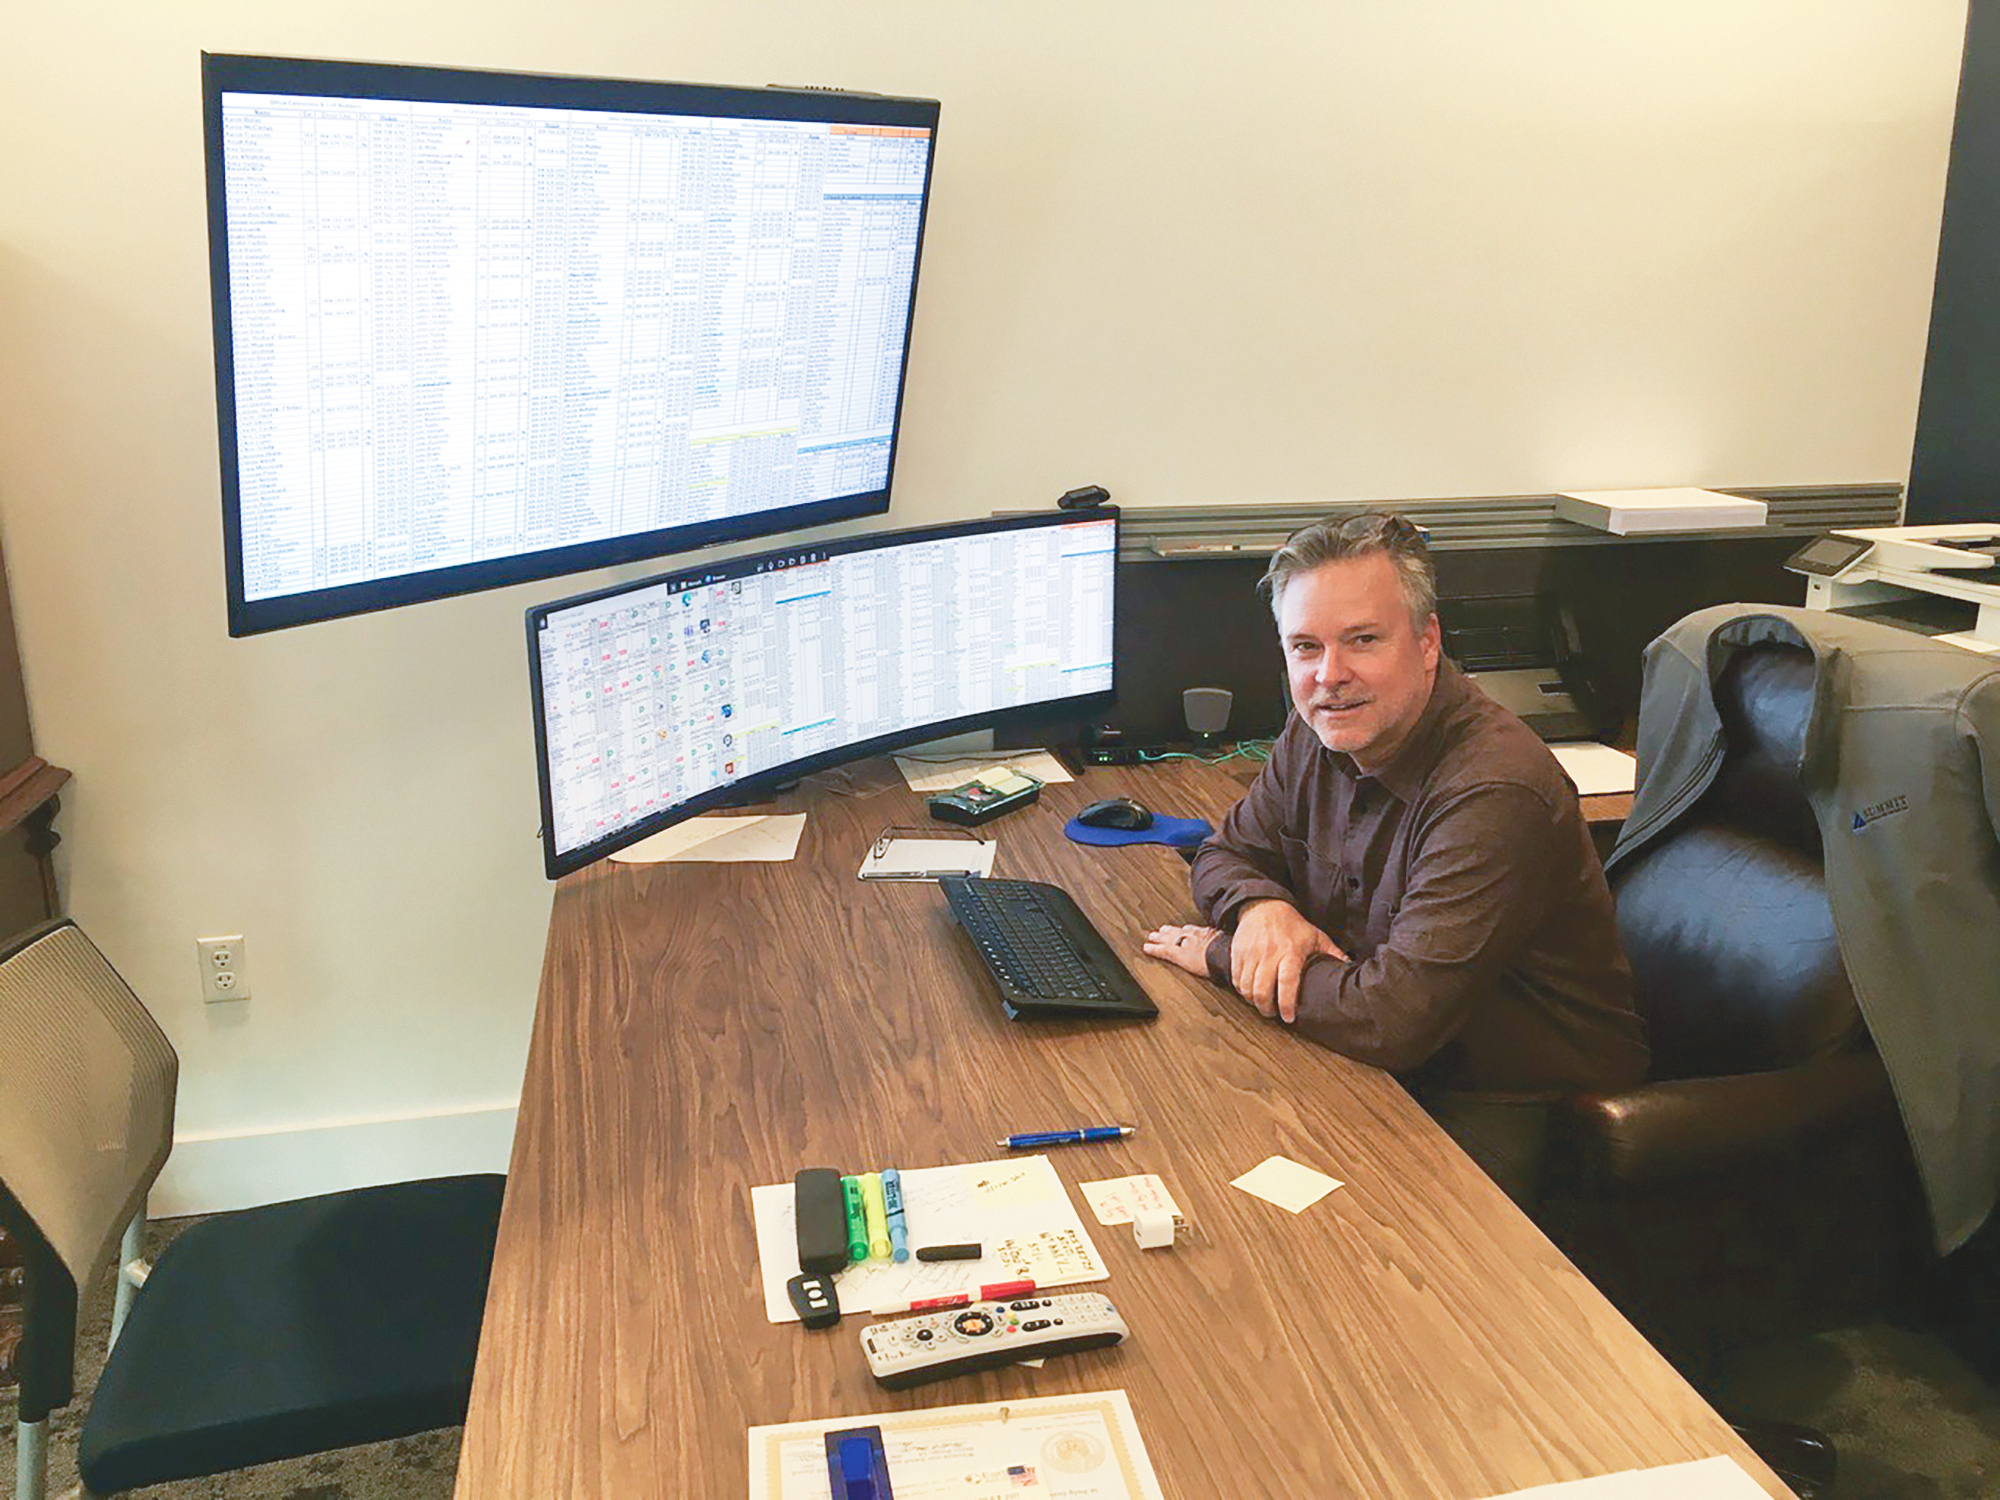 Marc Padgett, president of Summit Contracting Group, tracks the company’s 11 projects under construction in Northeast Florida with the aid of multiple computer monitors.